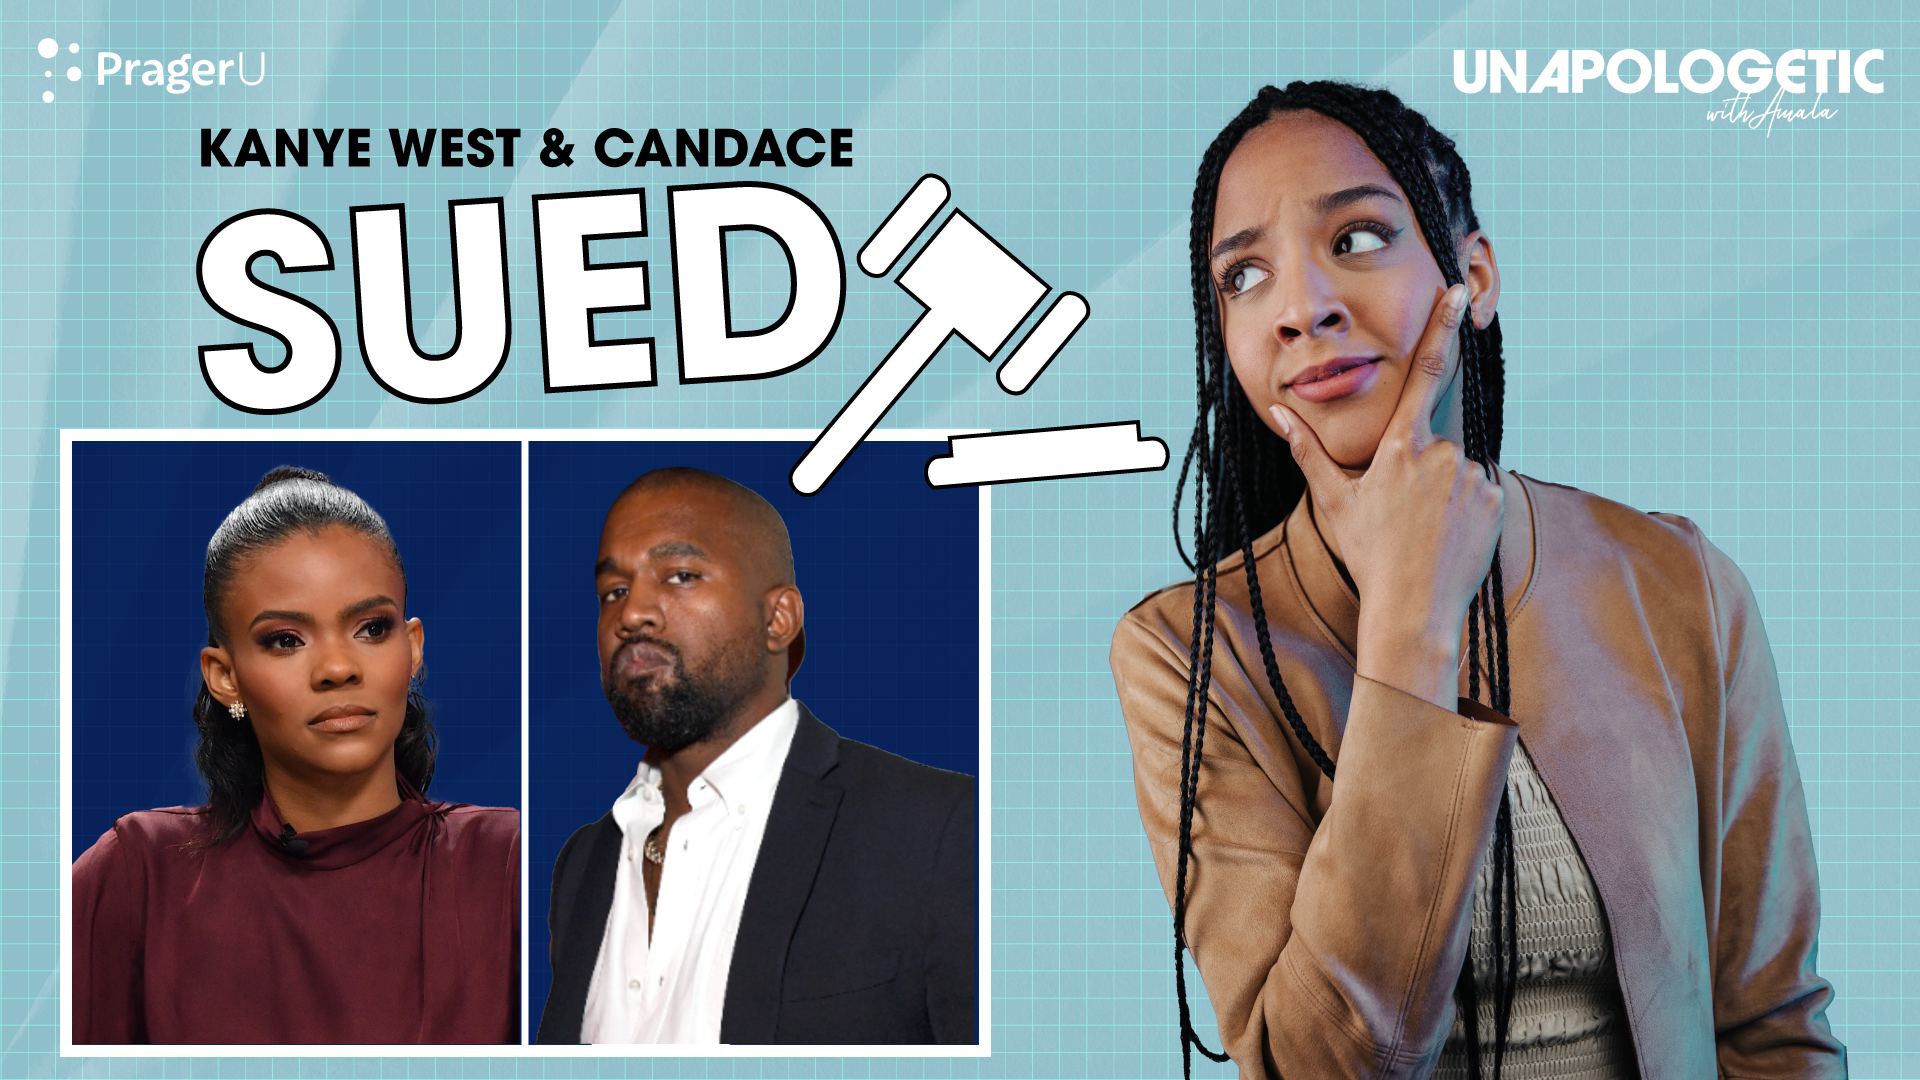 Kanye West and Candace Owens Sued? and Crazy Environmentalists: 10/17/2022